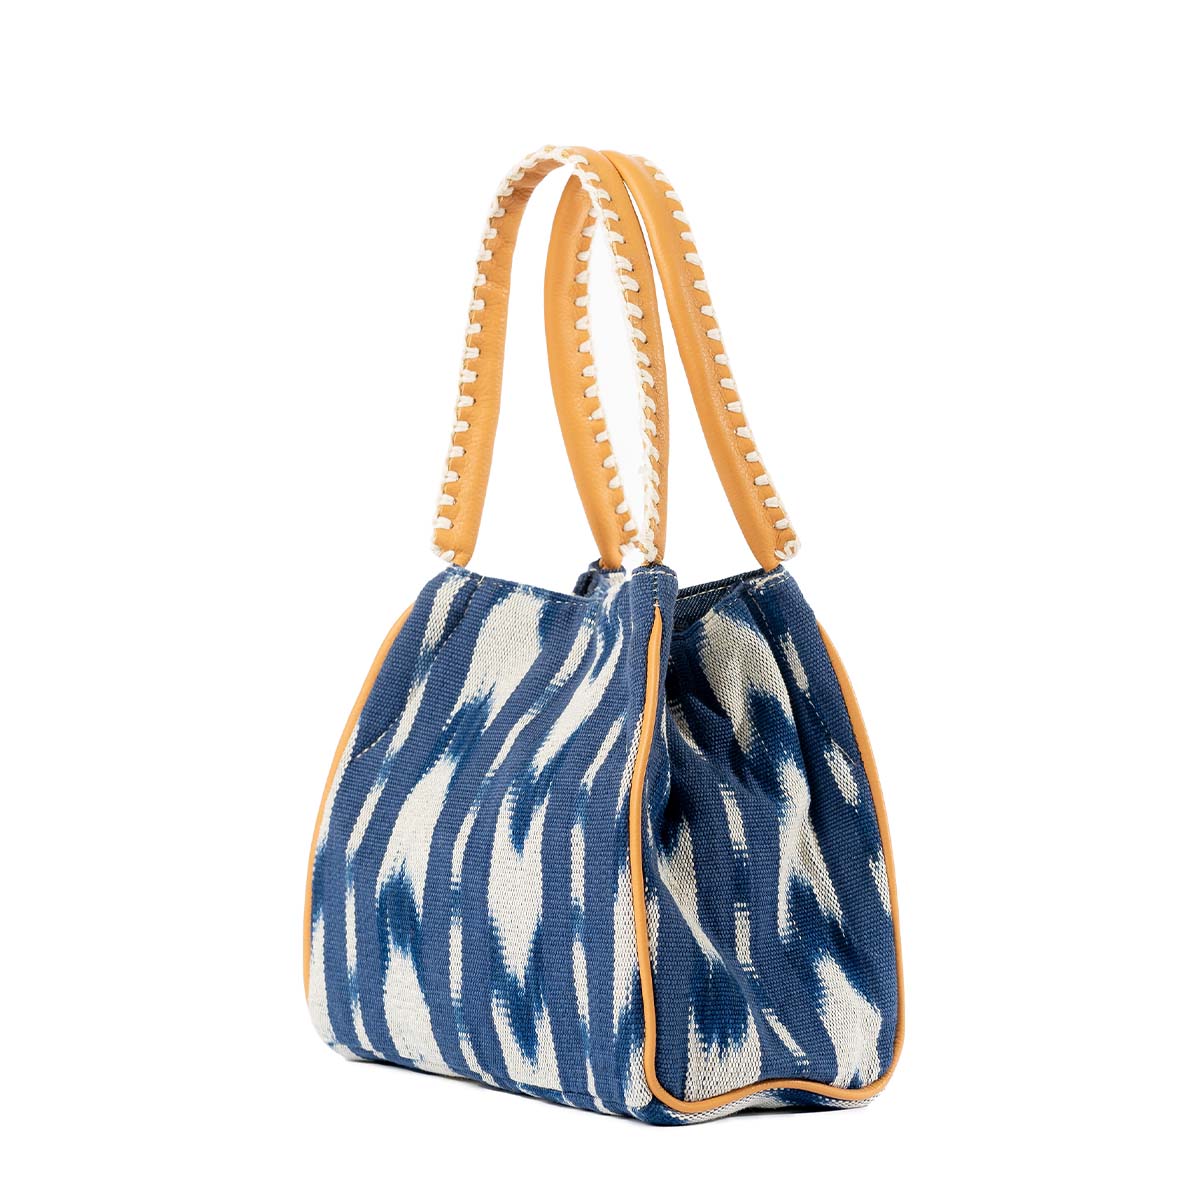 A right-sided angle of the hand woven artisan Flora Petite Crossbody in Atitlán Hills pattern. It has vertical and chevron dark blue and white stripes.